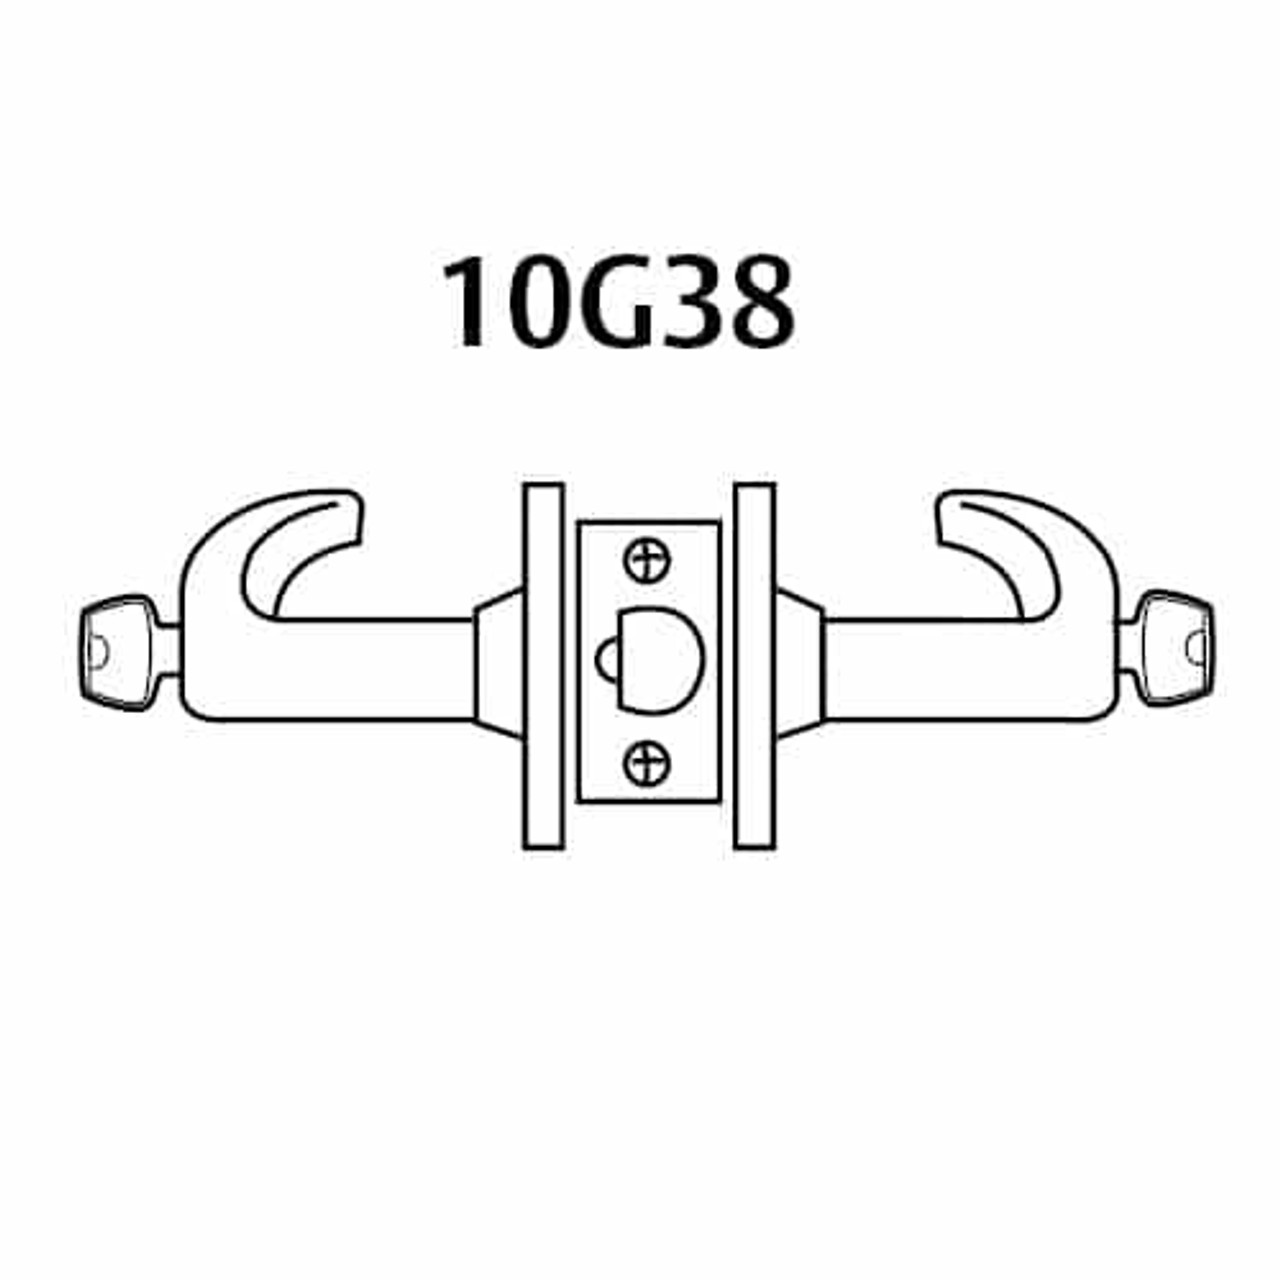 2870-10G38-GB-03 Sargent 10 Line Cylindrical Classroom Locks with B Lever Design and G Rose Prepped for SFIC in Bright Brass